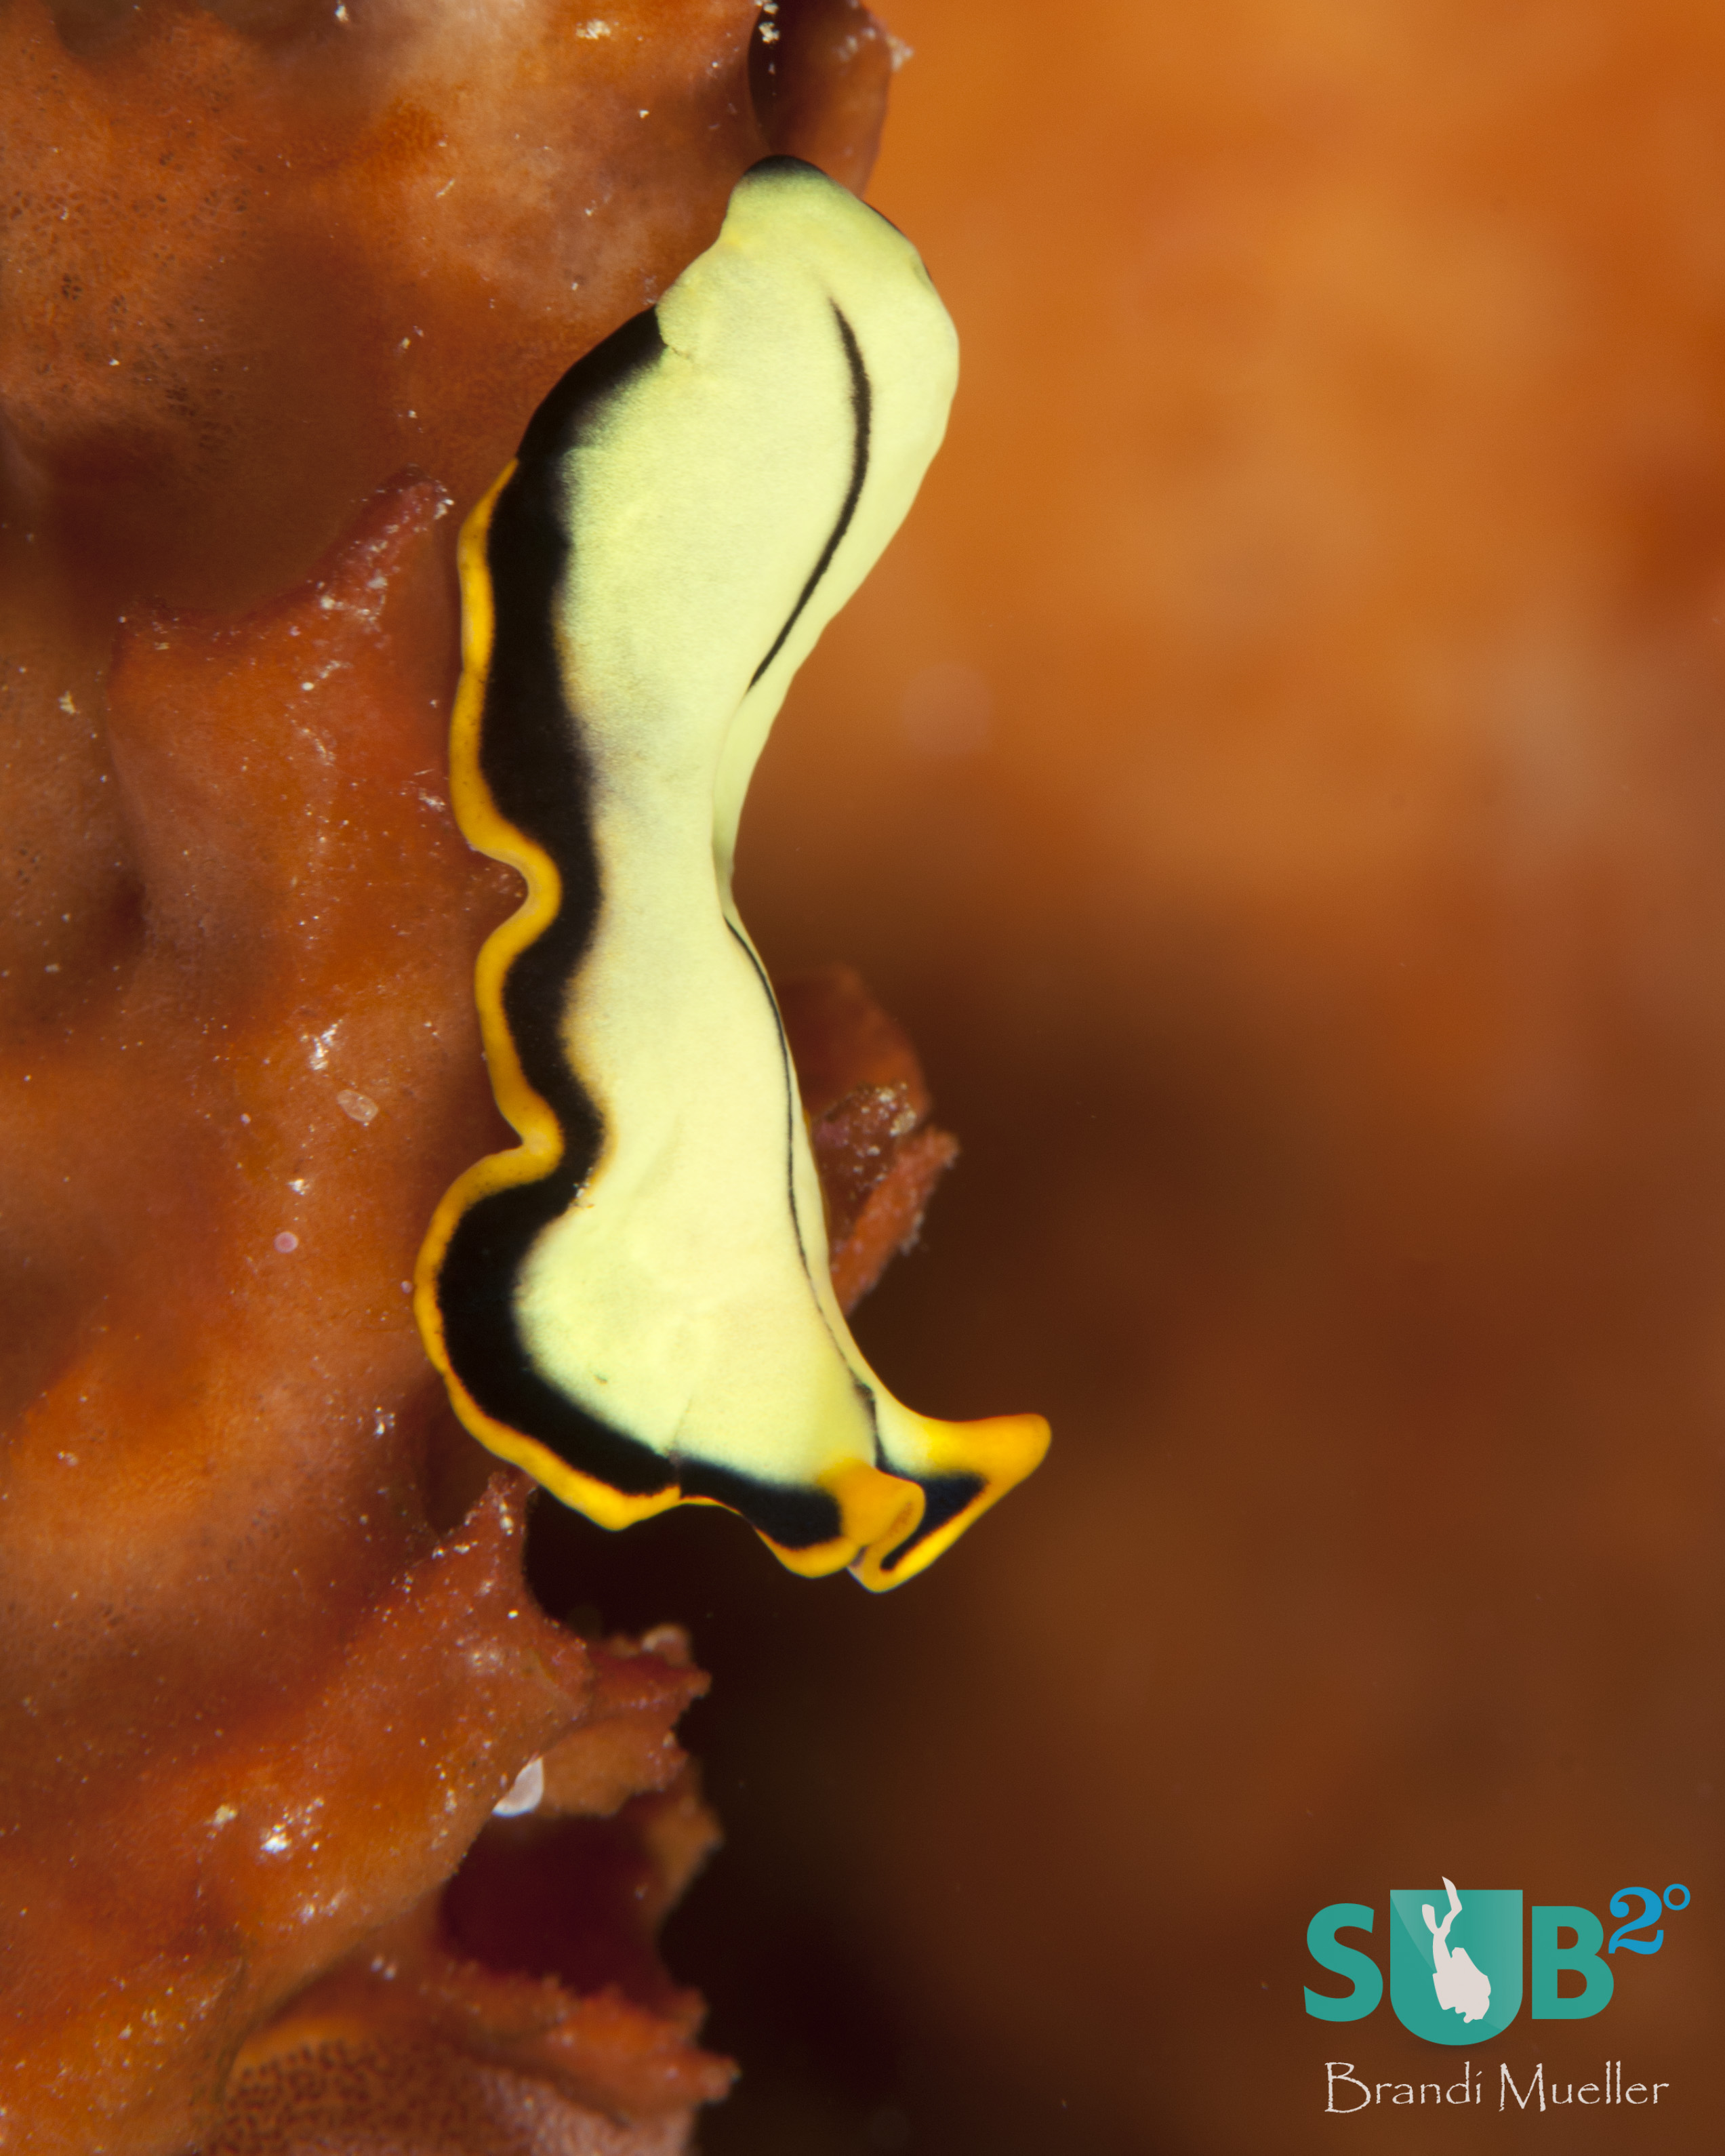 A divided flatworm, or Pseudoceros dimidatus, makes its way along a sponge. If a flatworm is cut in half, it will regenerate into two full flatworms.